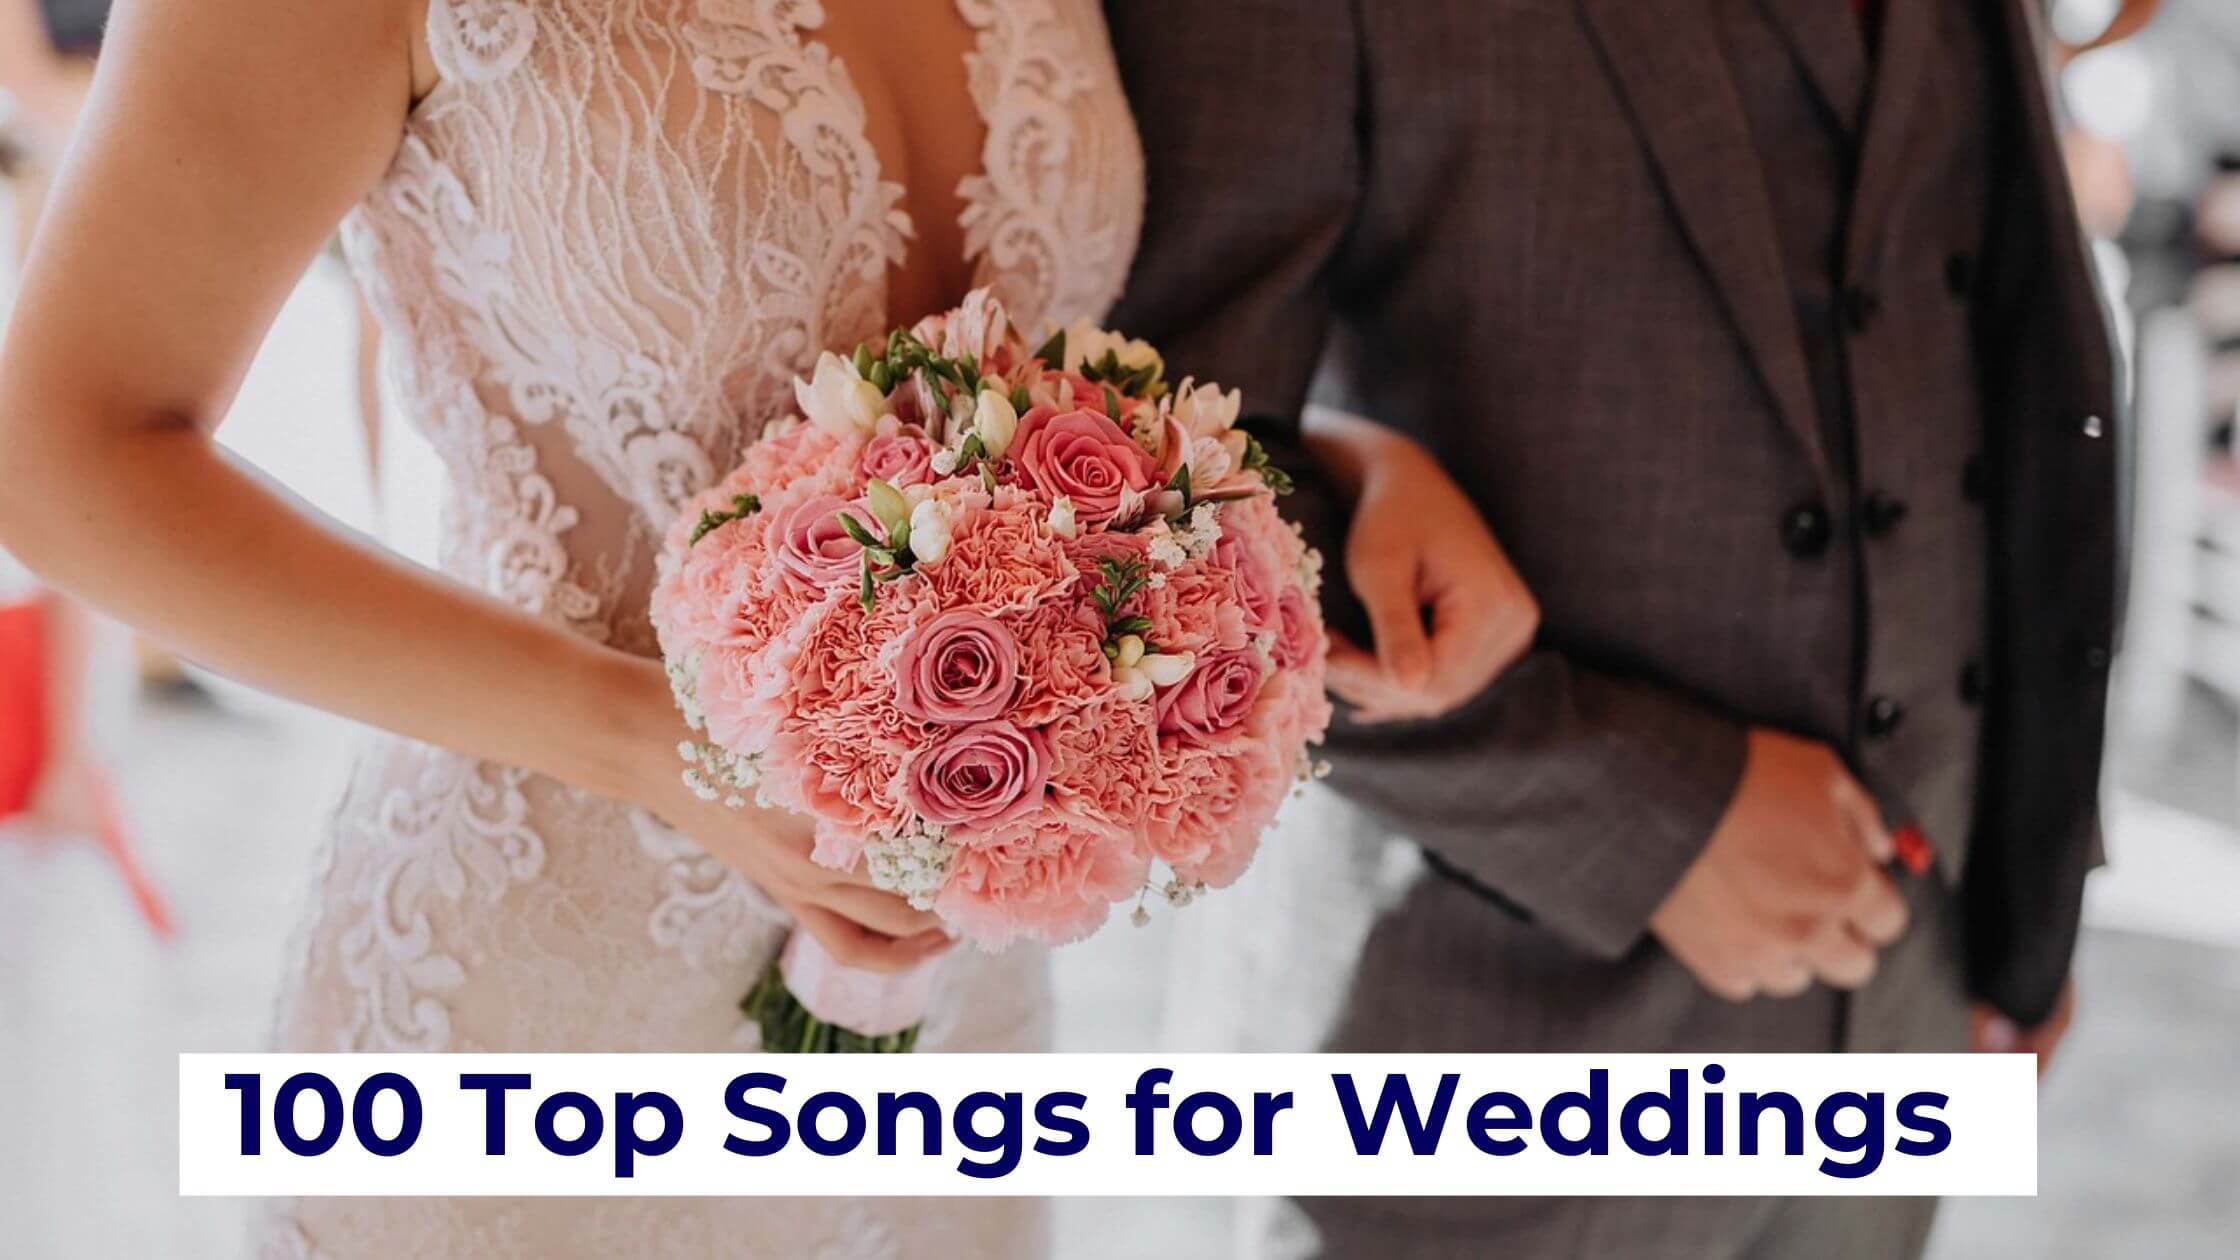 The Ultimate Wedding Playlist: 100 Top Songs for Weddings.